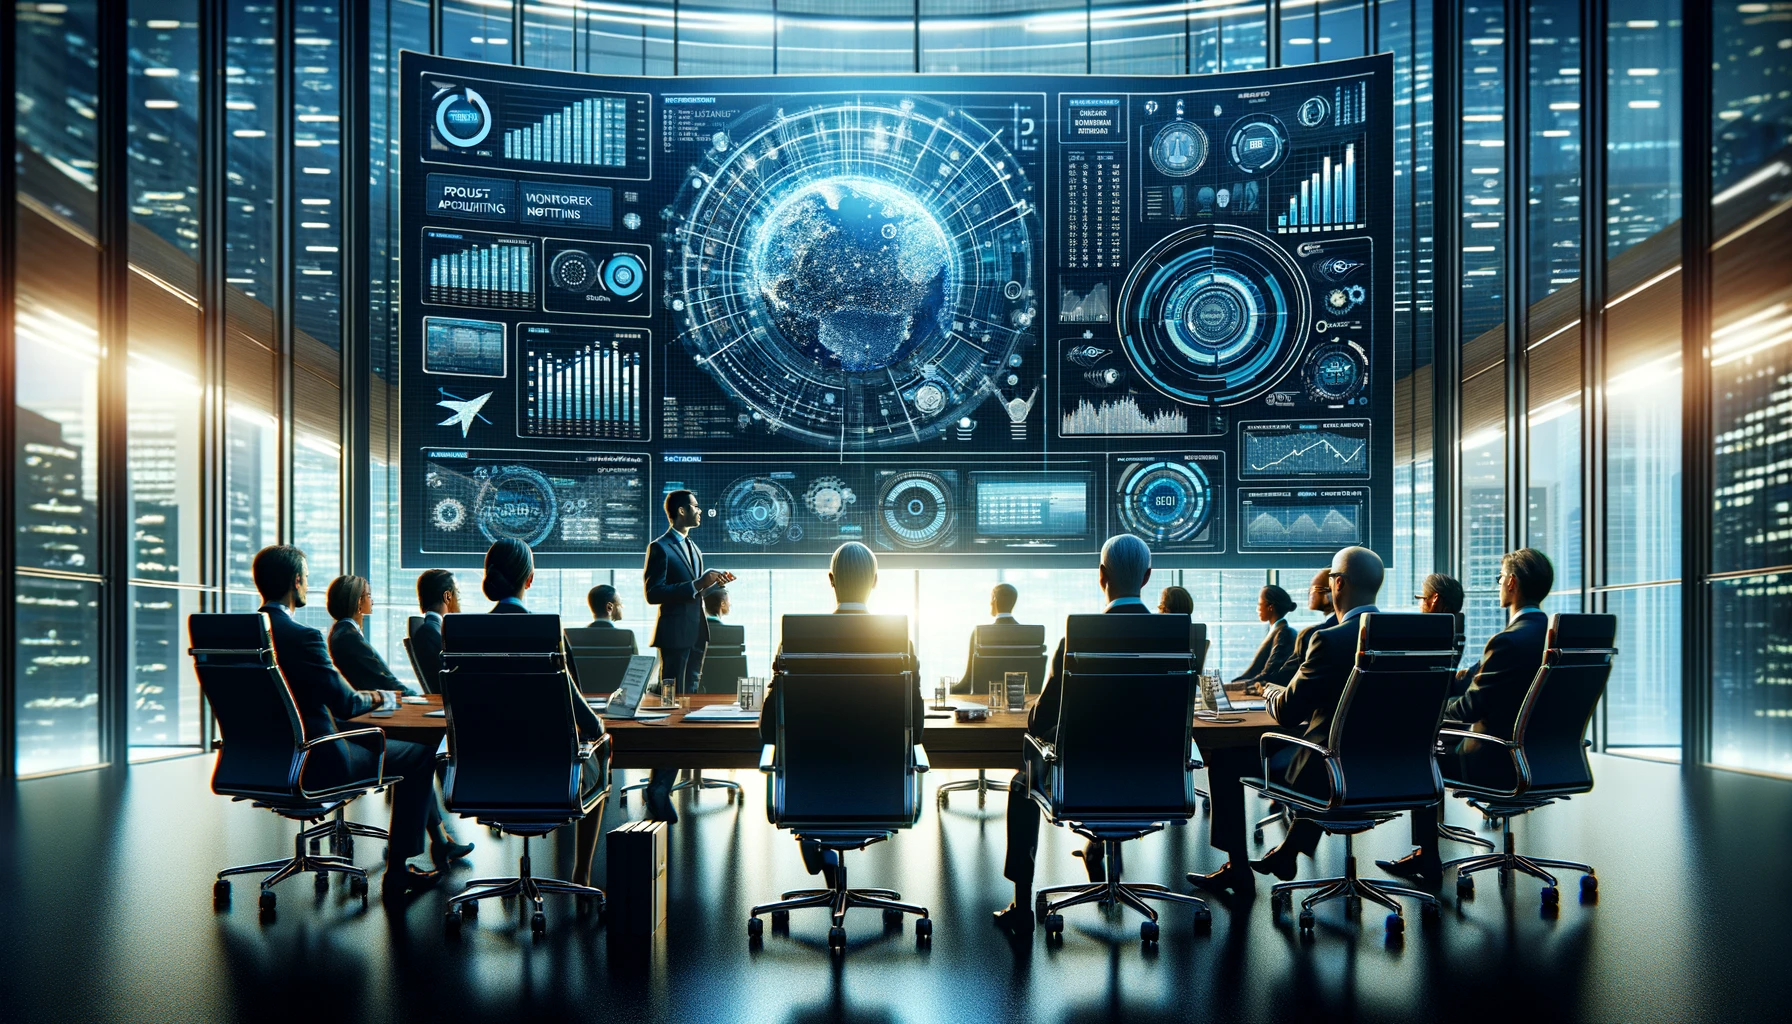 This visual portrays a high-tech corporate boardroom scene where top executives are engaged in strategic planning using advanced analytics and tools for project accounting, network monitoring, and more.